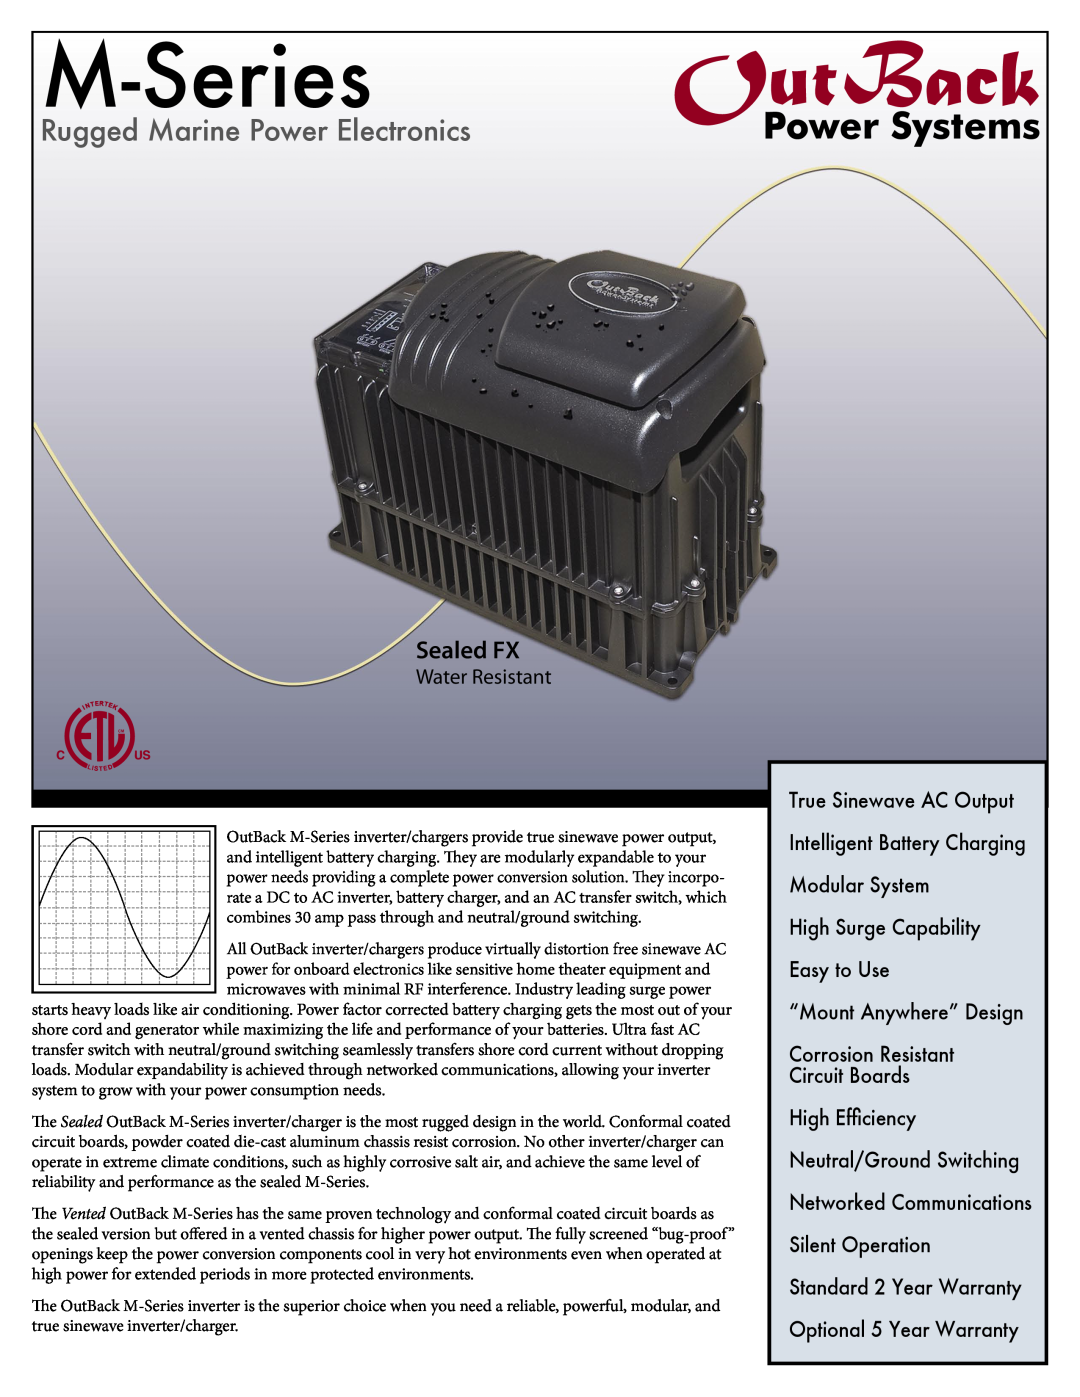 Outback Power Systems Sealed FX warranty M-Series, Rugged Marine Power Electronics, Water Resistant 